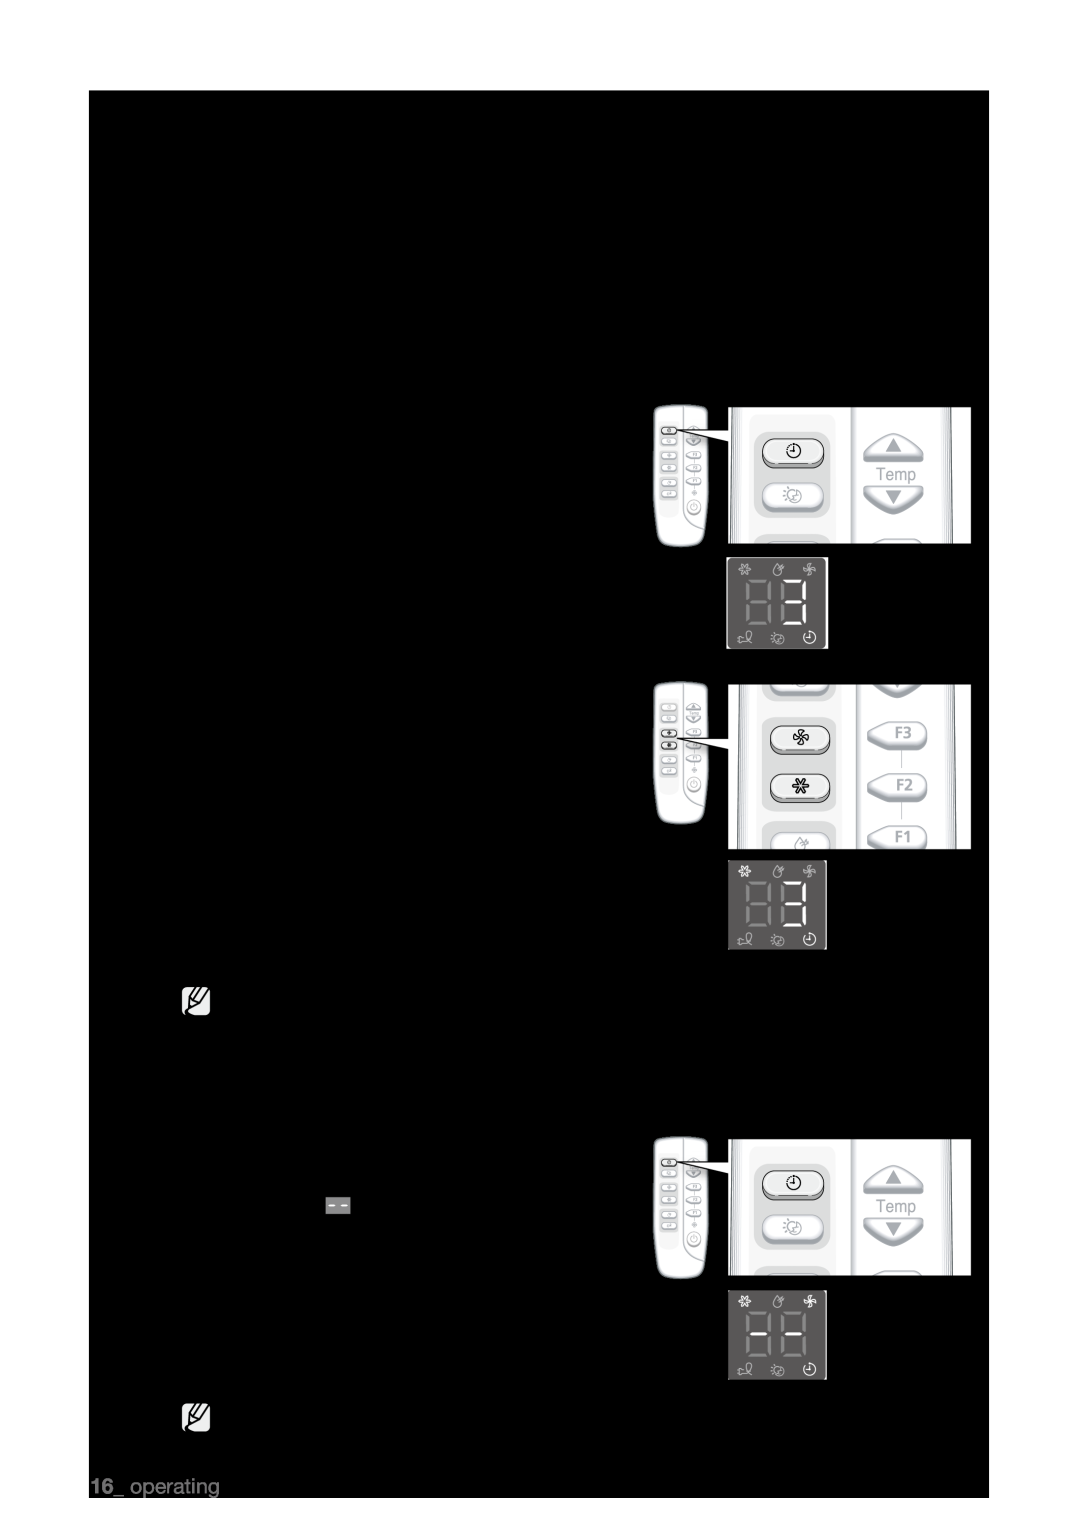 Samsung AW06EDB Series, DB98-29033A Advanced Functions, To deactivate the On timer, operating your air conditioner 